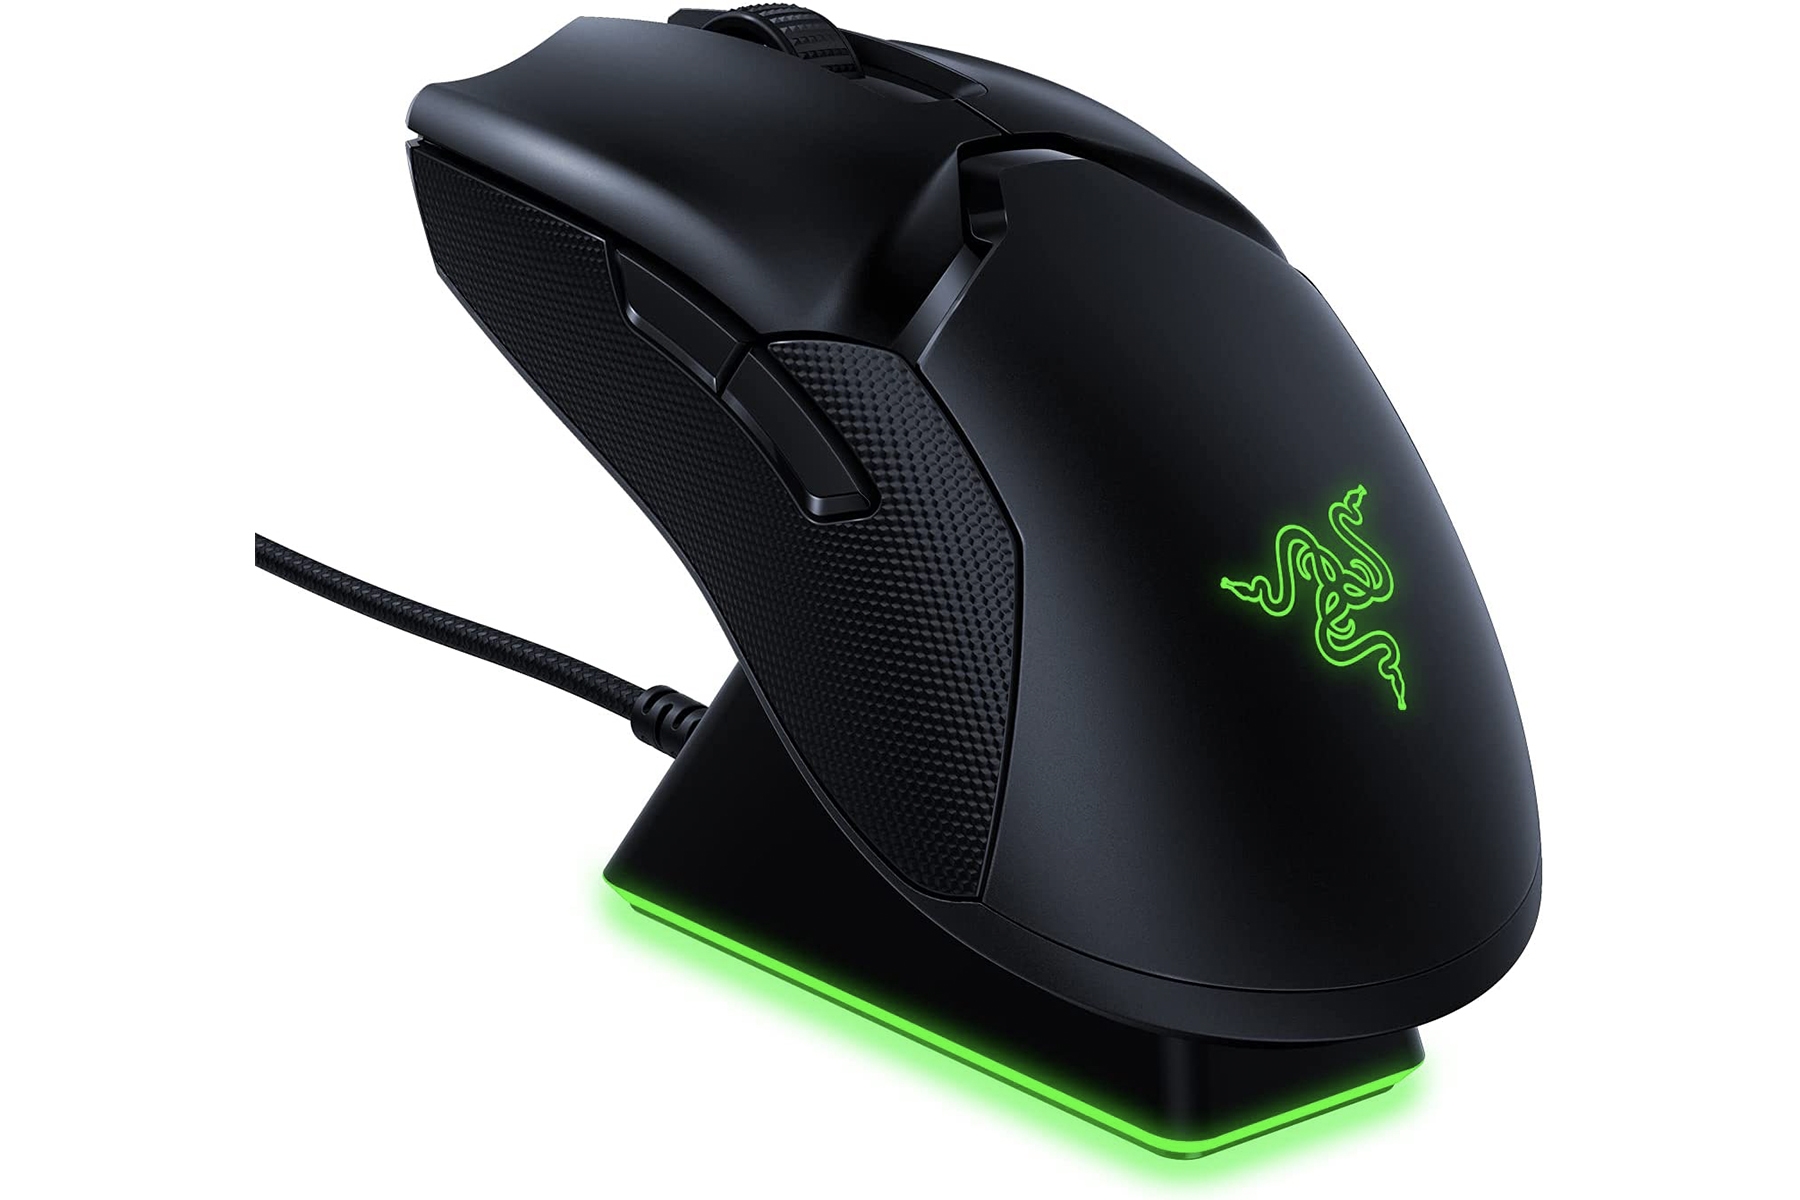 Razer Viper Ultimate Hyperspeed gaming mouse | DeviceDaily.com